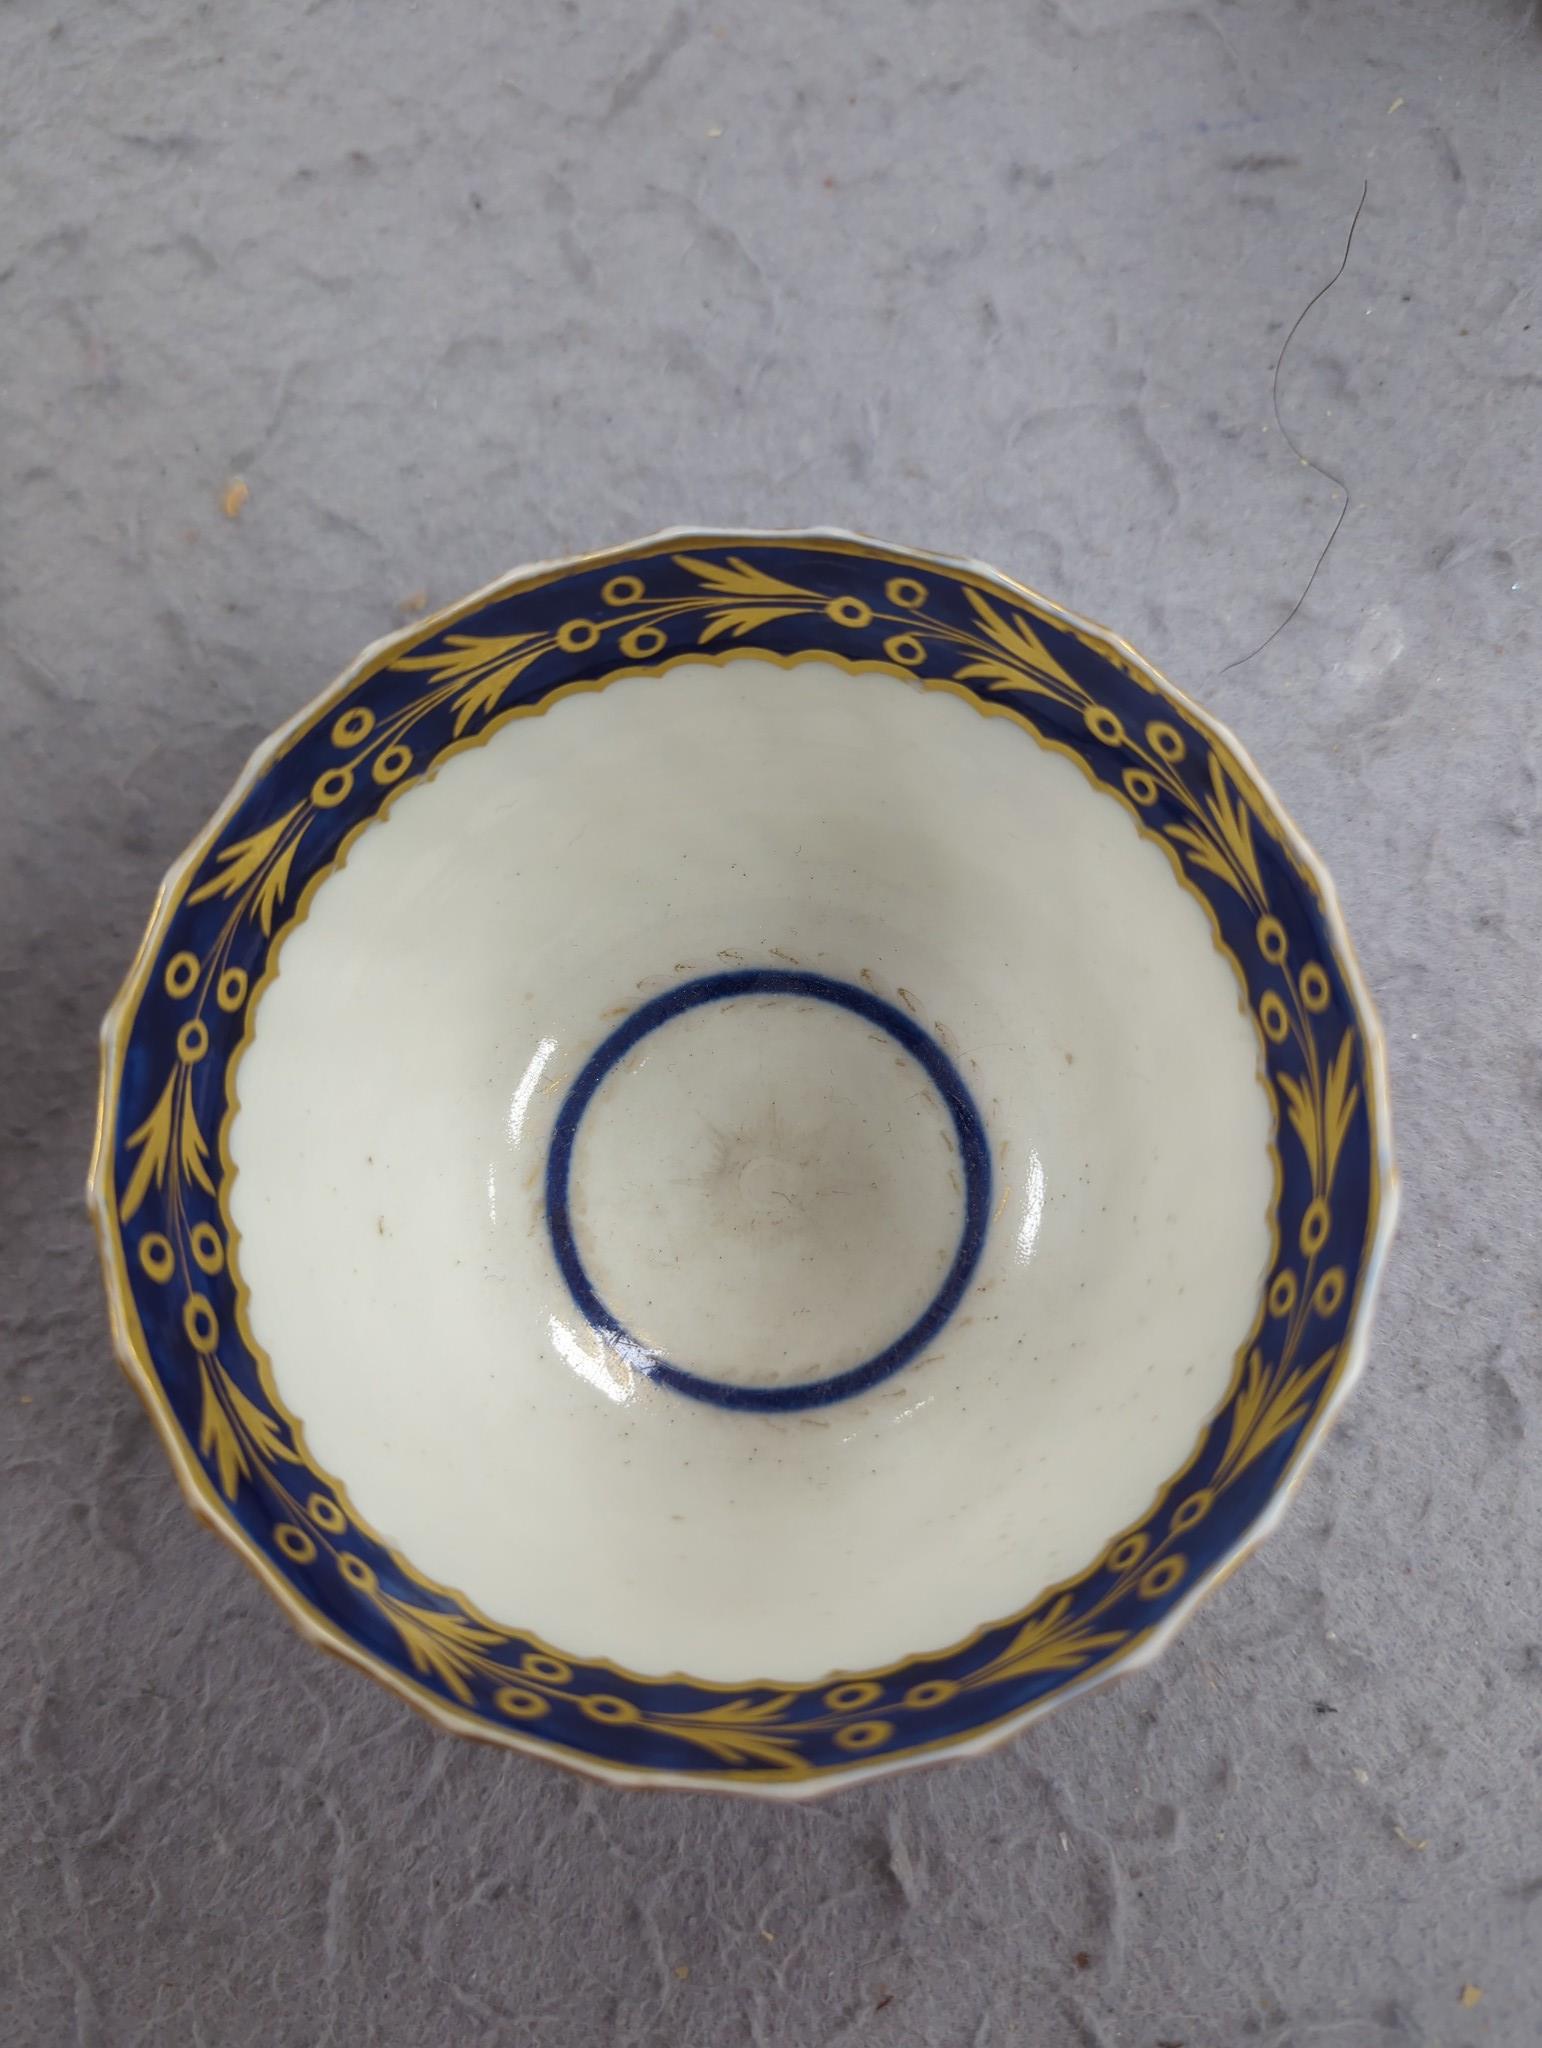 An early 19th century Chamberlains plate, Rockingham, Worcester etc. teawares